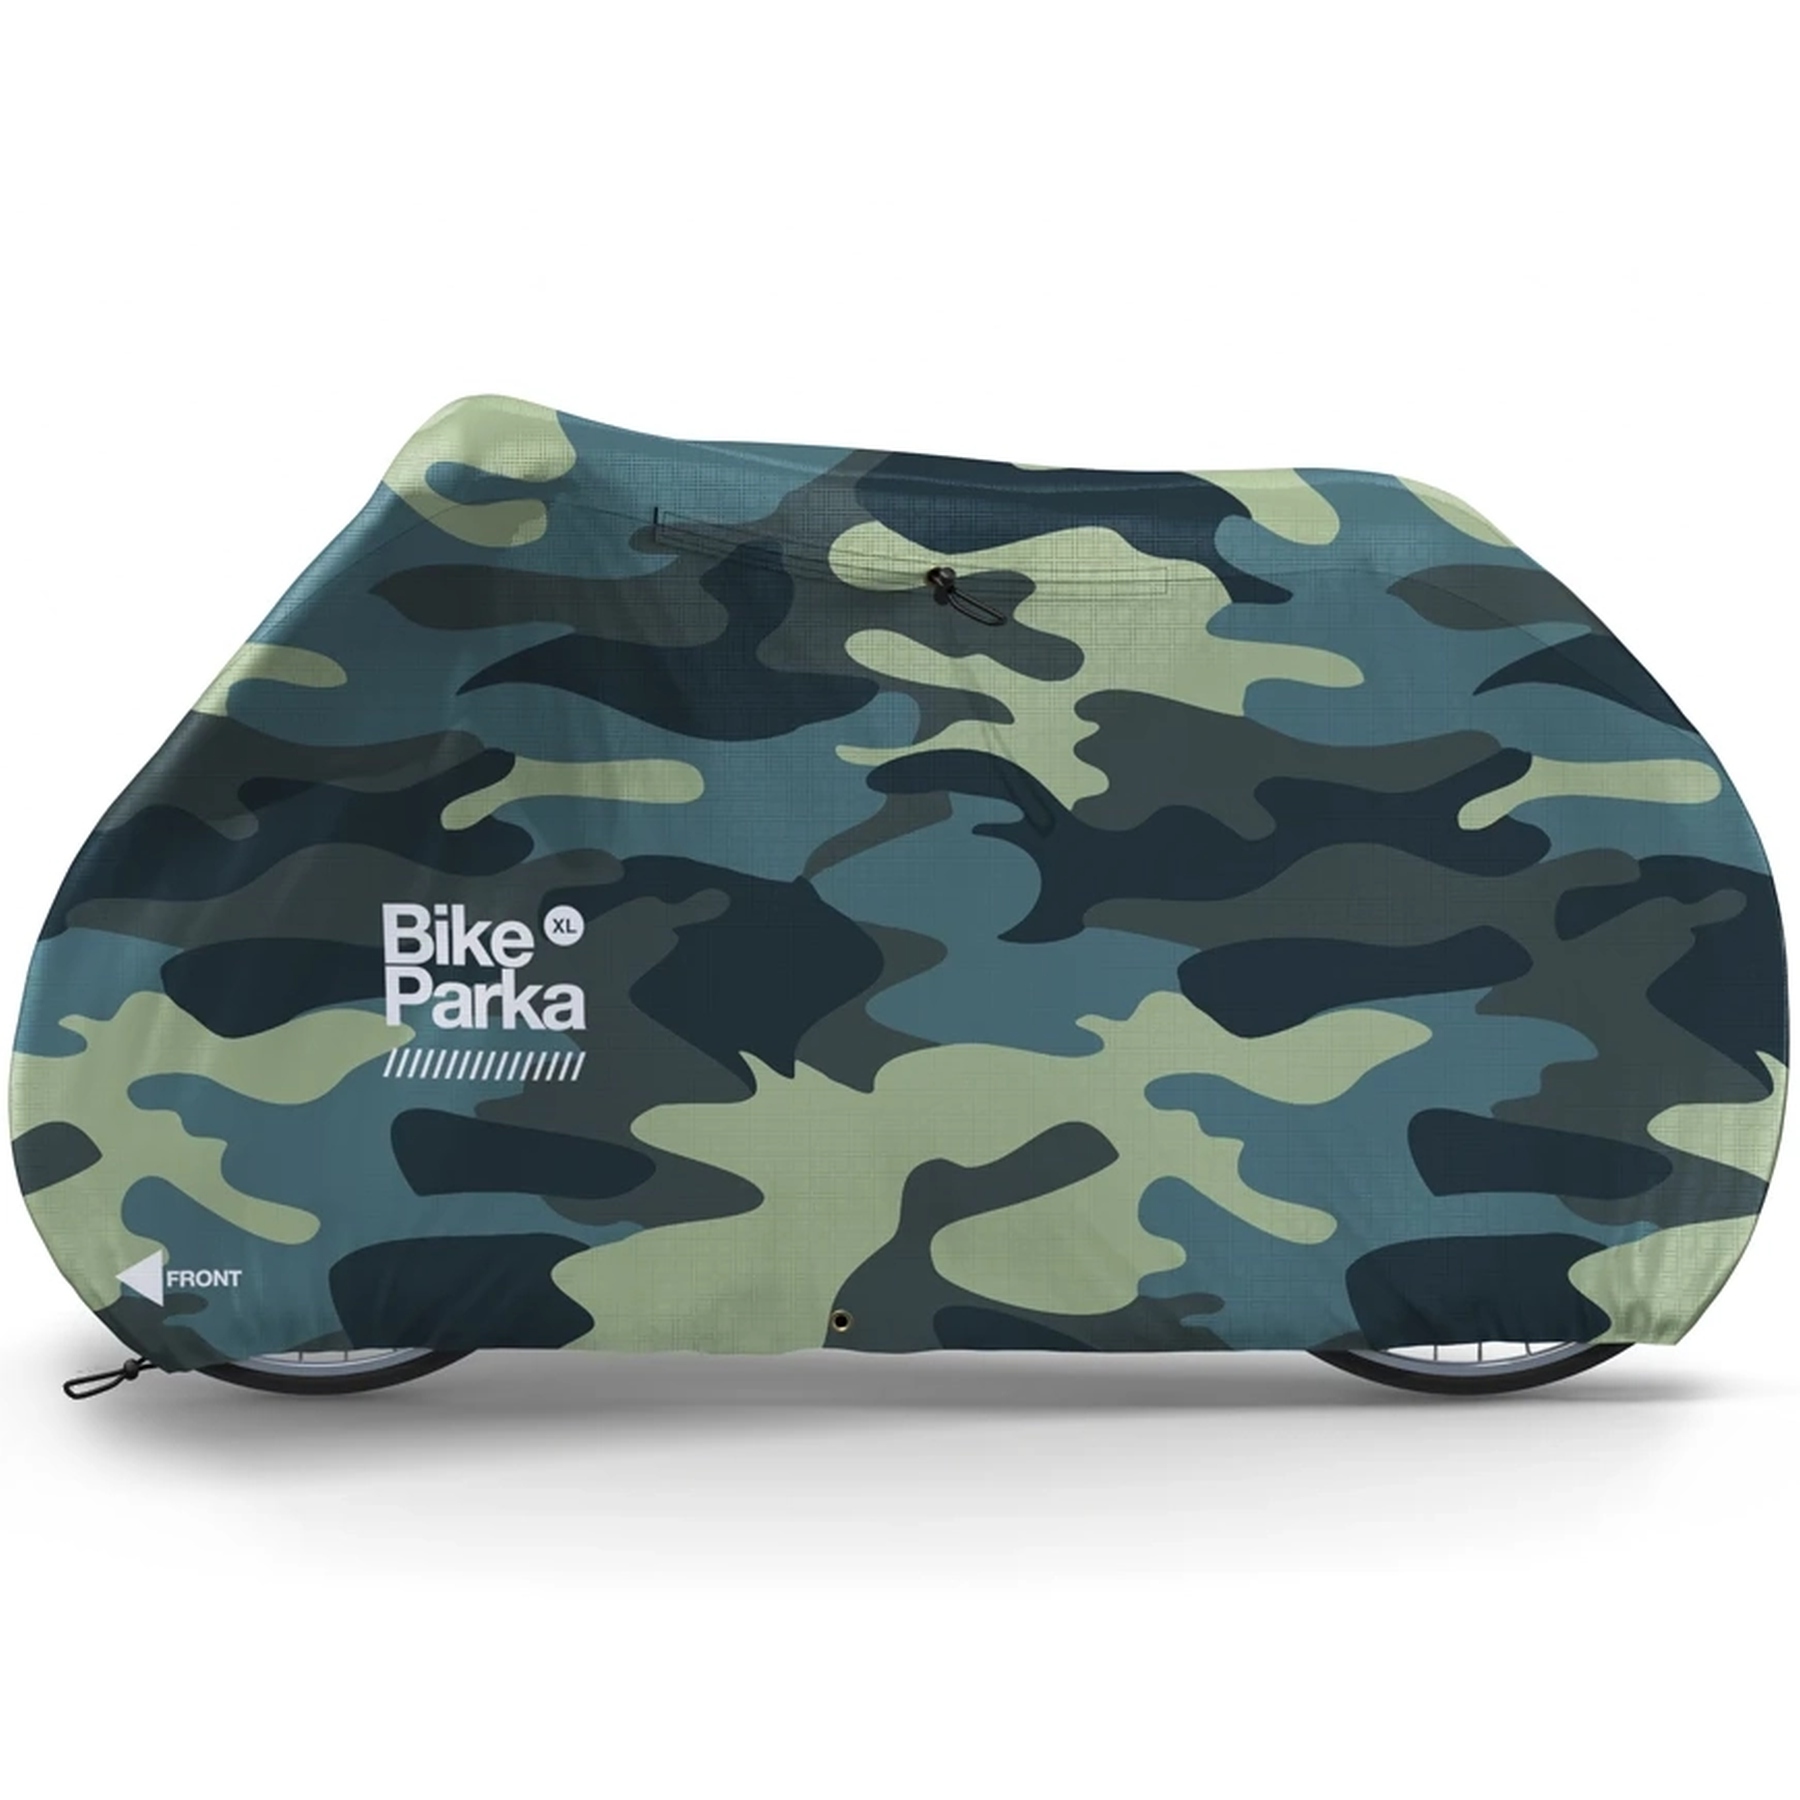 Picture of BikeParka XL Bicycle Cover - Camouflage - 225x140cm